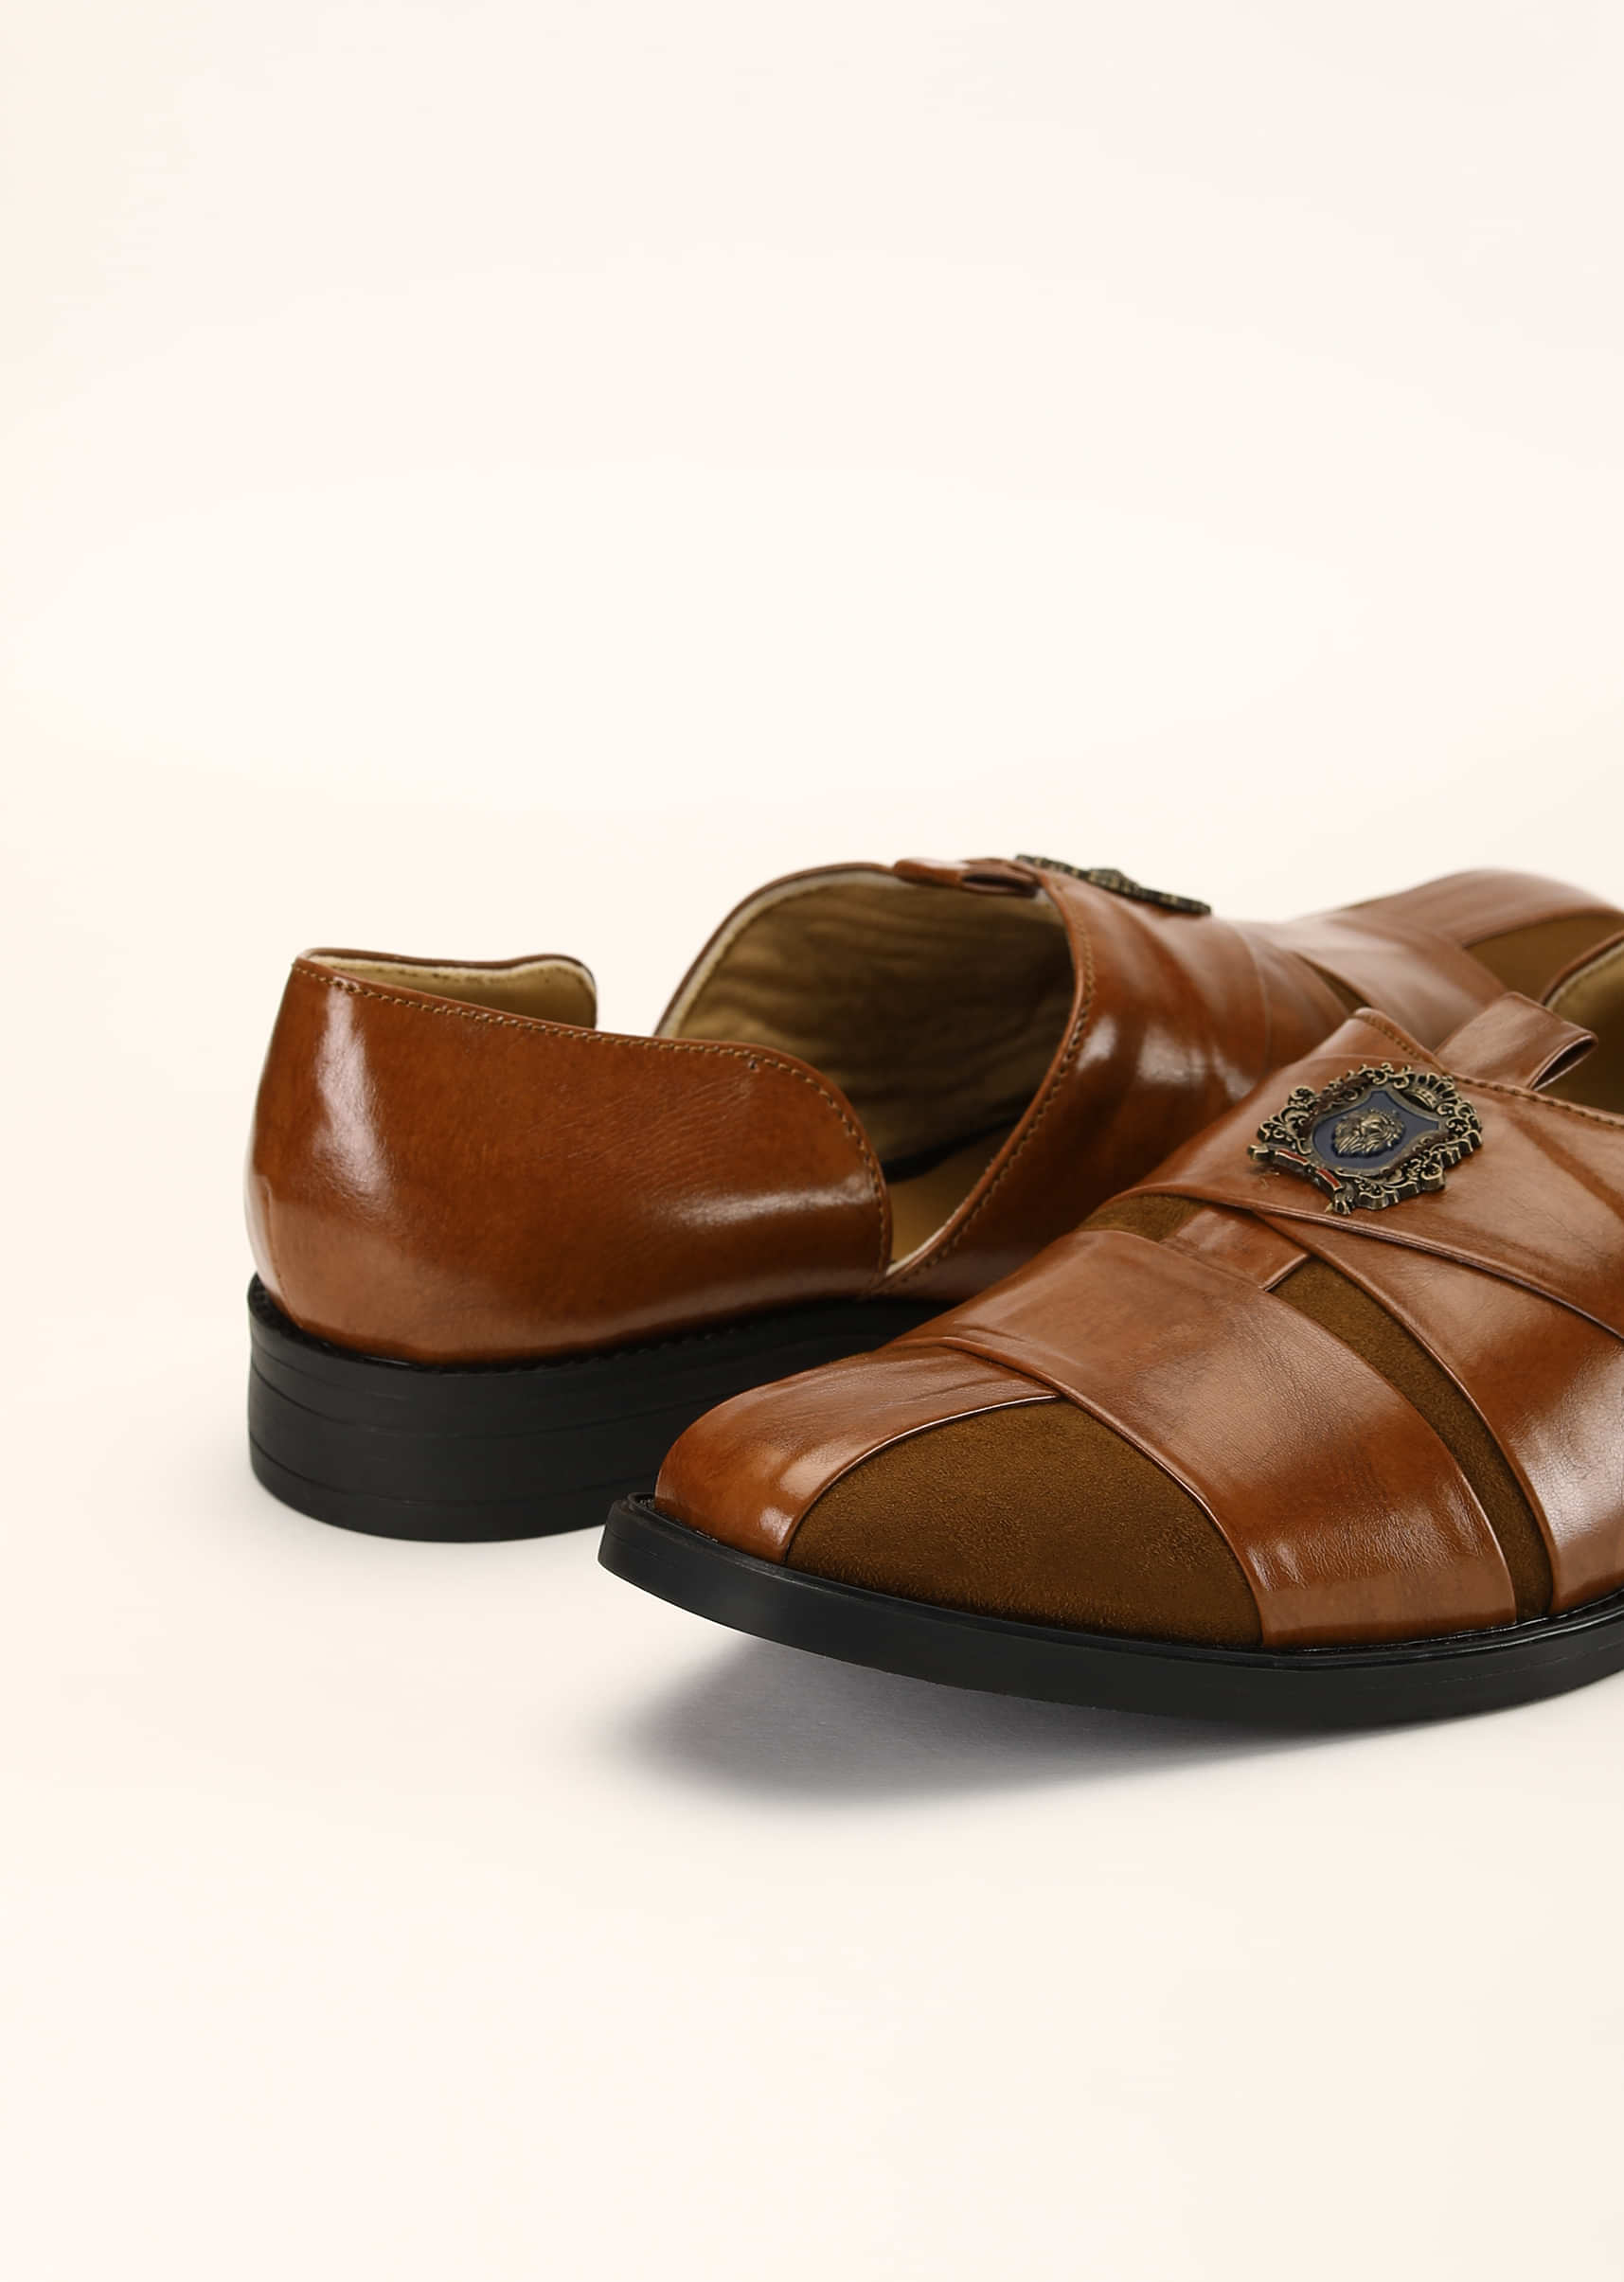 Tan Peshawari Footwear In Rexine And Suede Leather Embellished With A Brooch